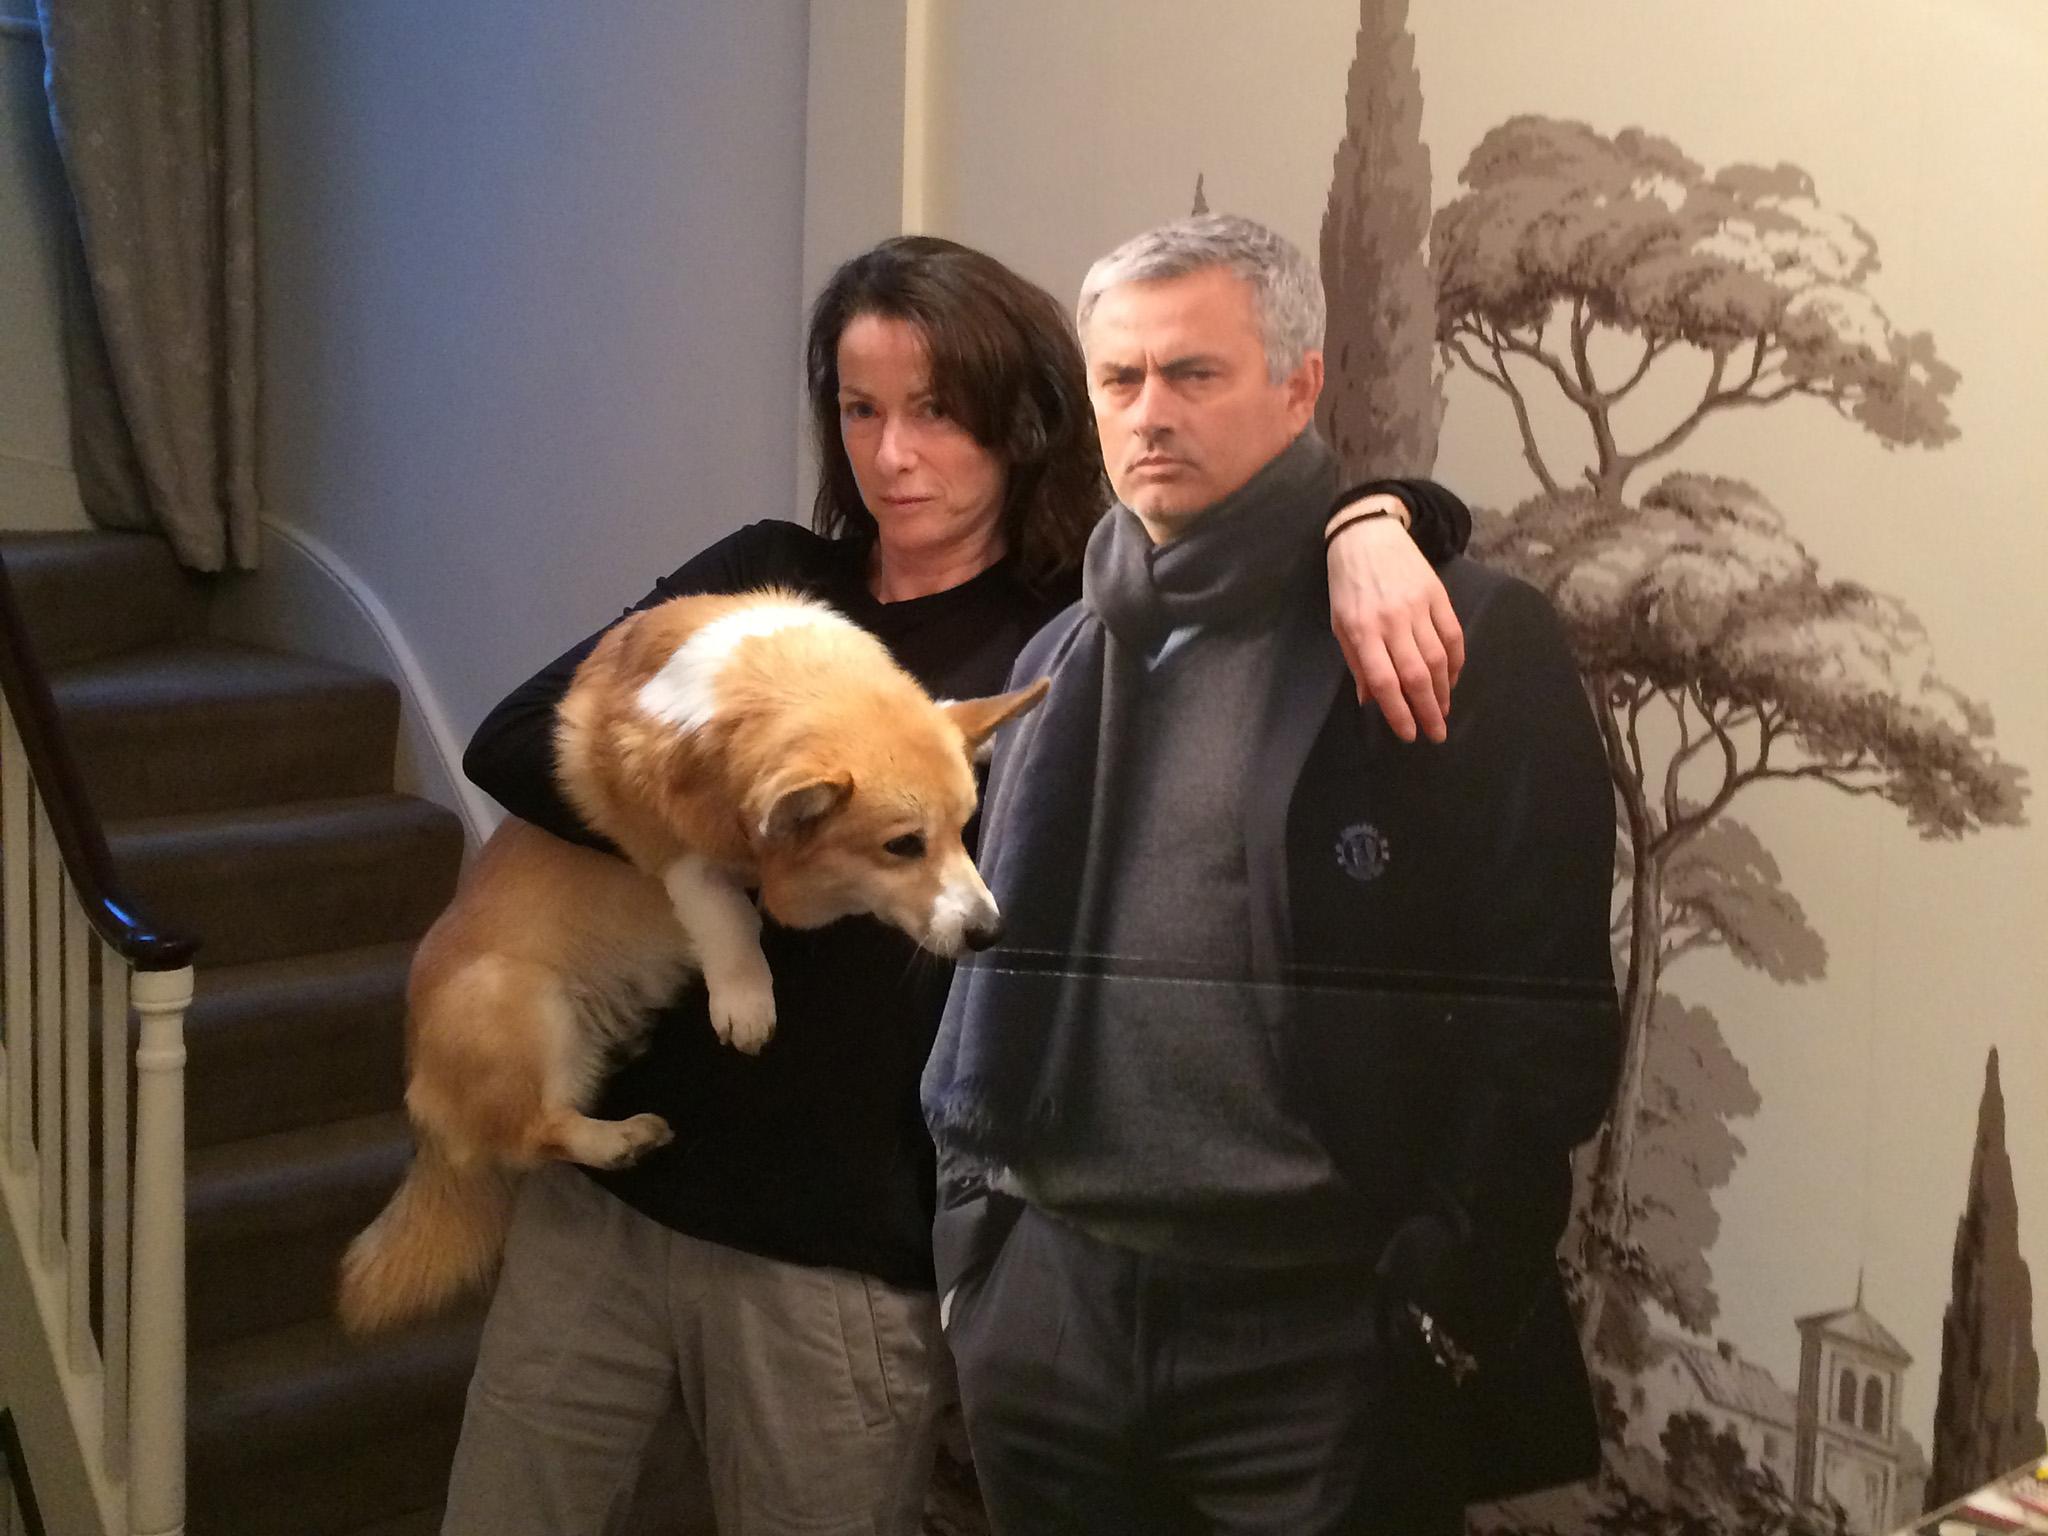 Sally Ann and her cut-out hero in her Chelsea home